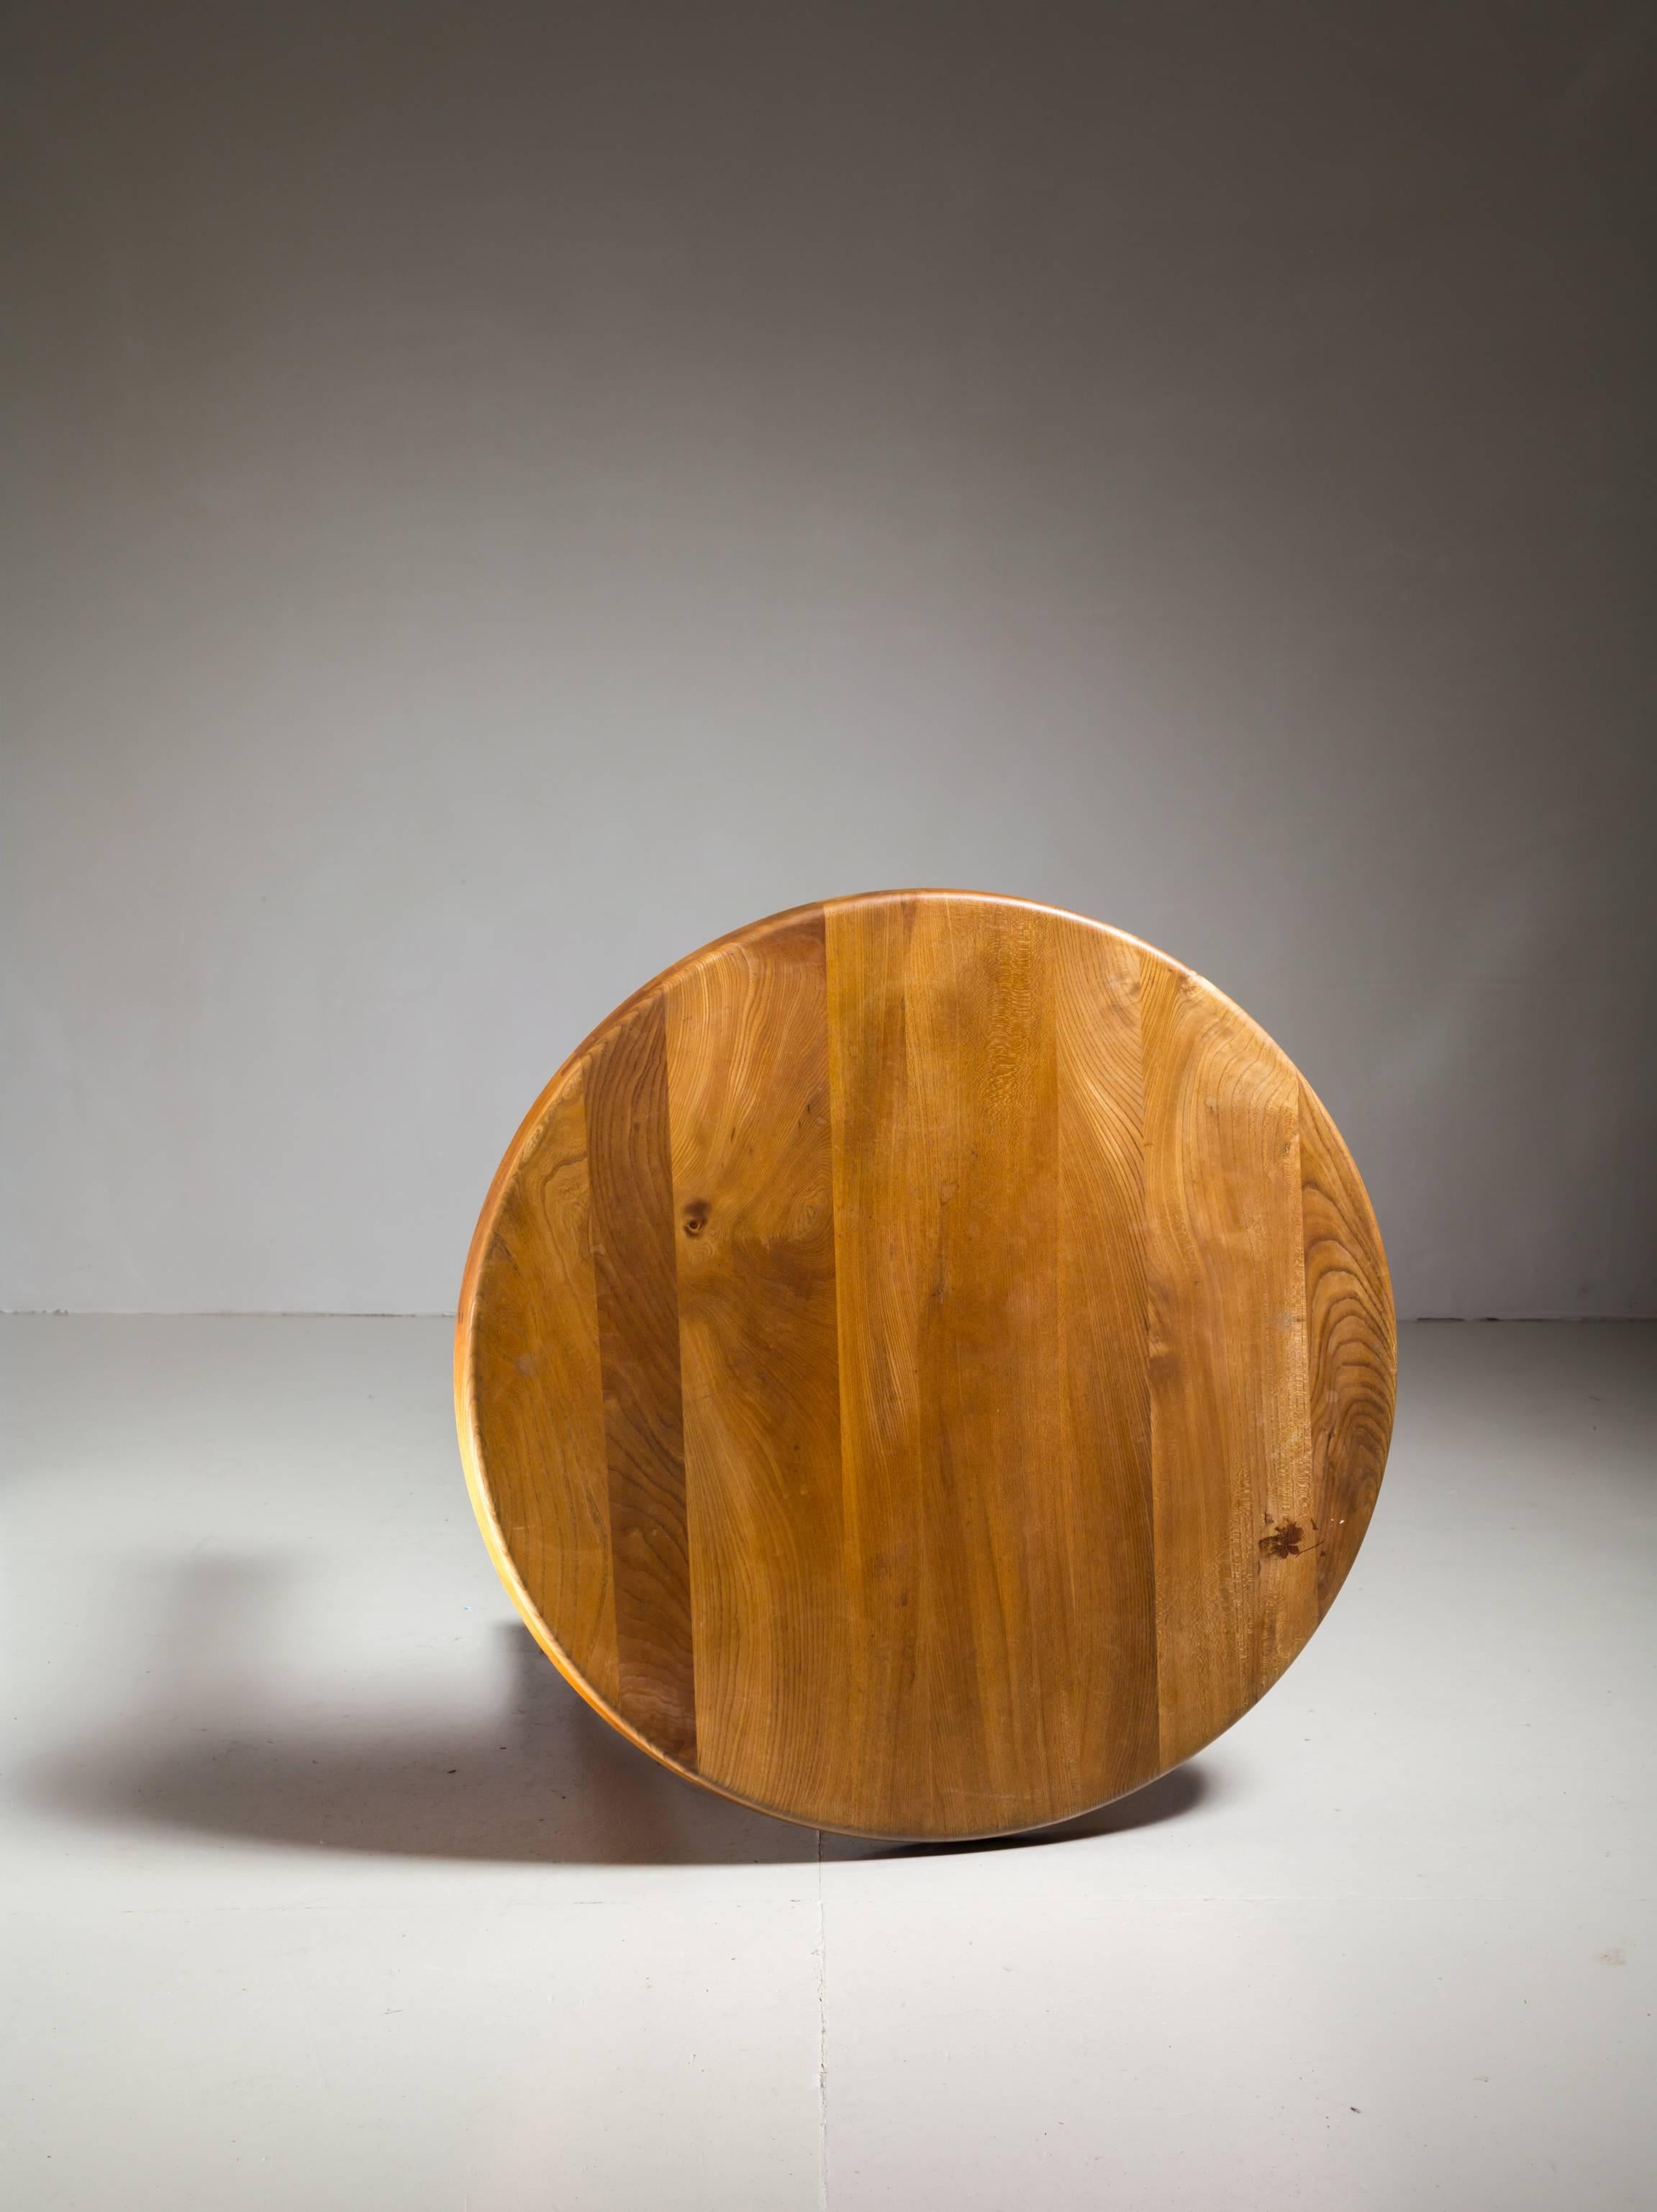 A small dining or breakfast table in solid elm by Pierre Chapo in a wonderful patina. The table stands on four thick, round legs and has a 5 cm (2 inch) thick top with a 97 cm (38 inch) diameter.
The table has the beautiful wood connections Chapo's